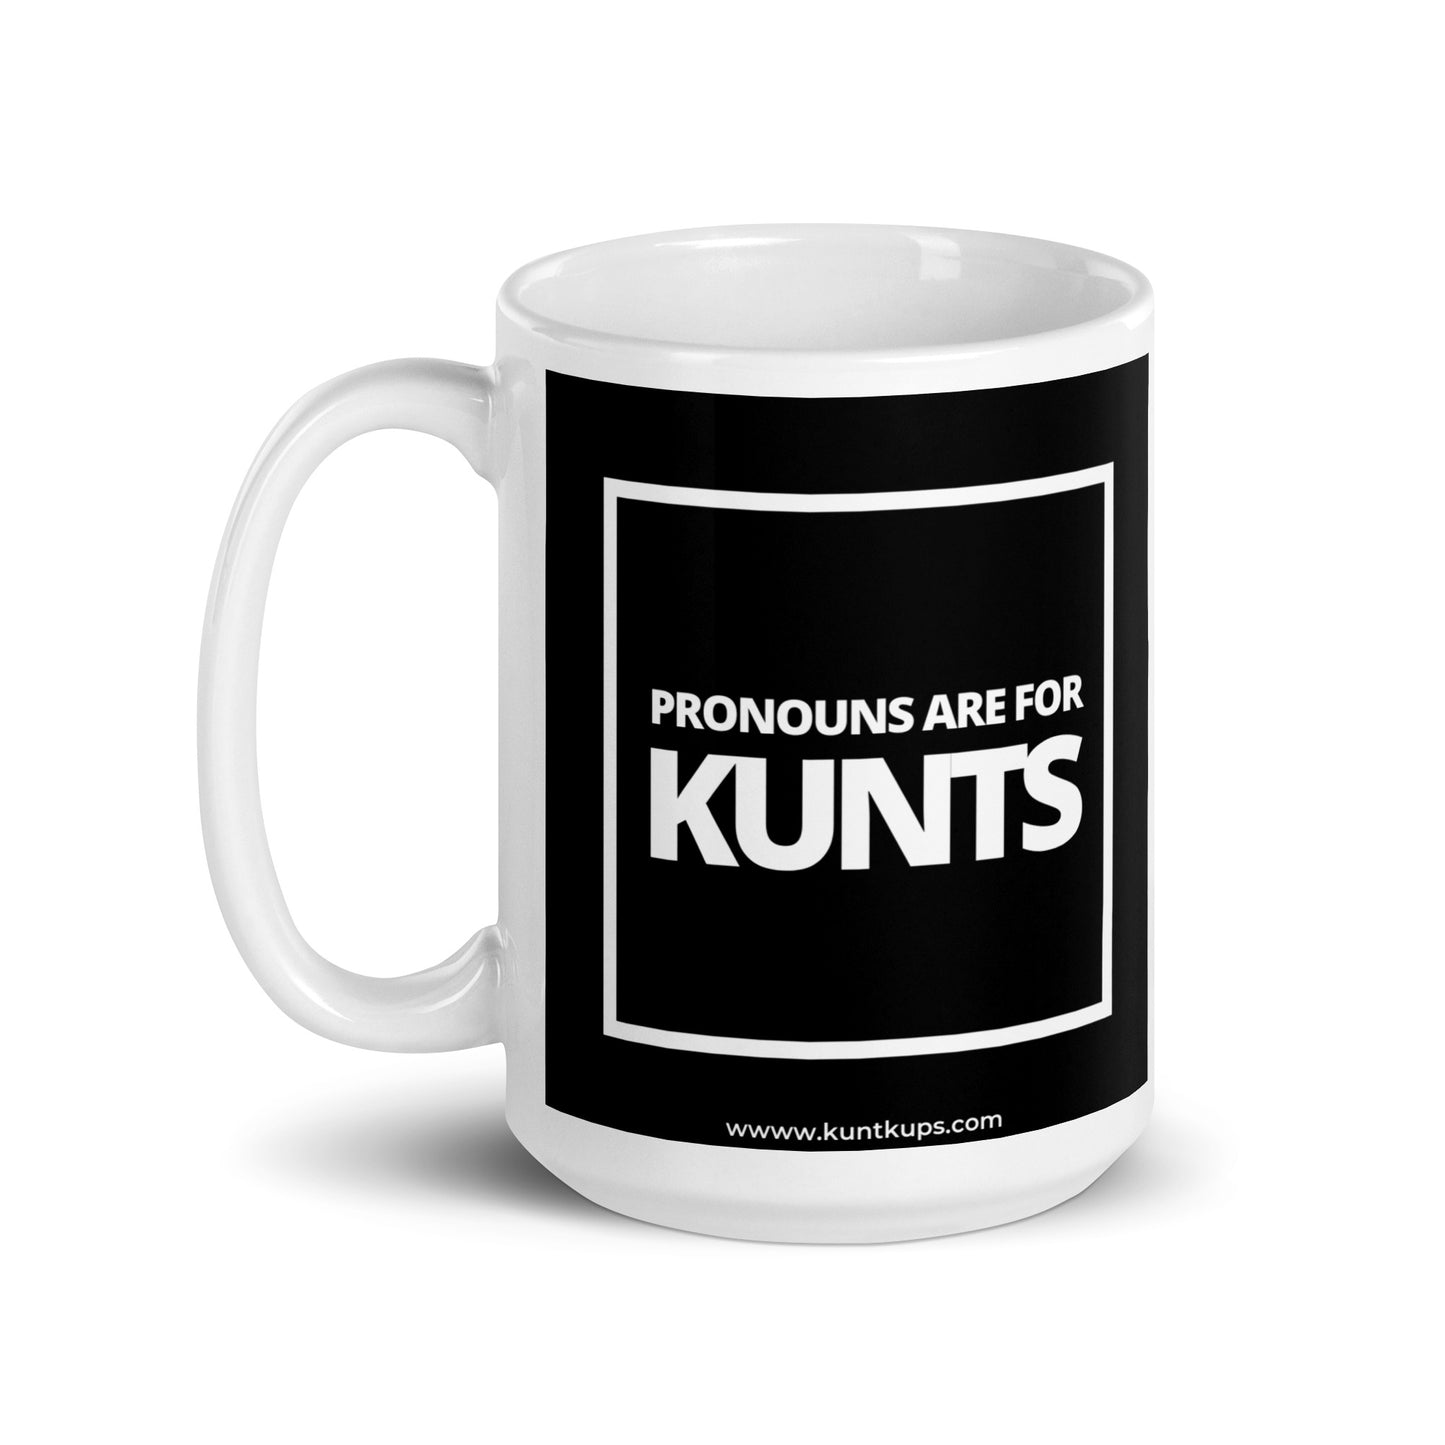 PRONOUNS ARE FOR KUNTS